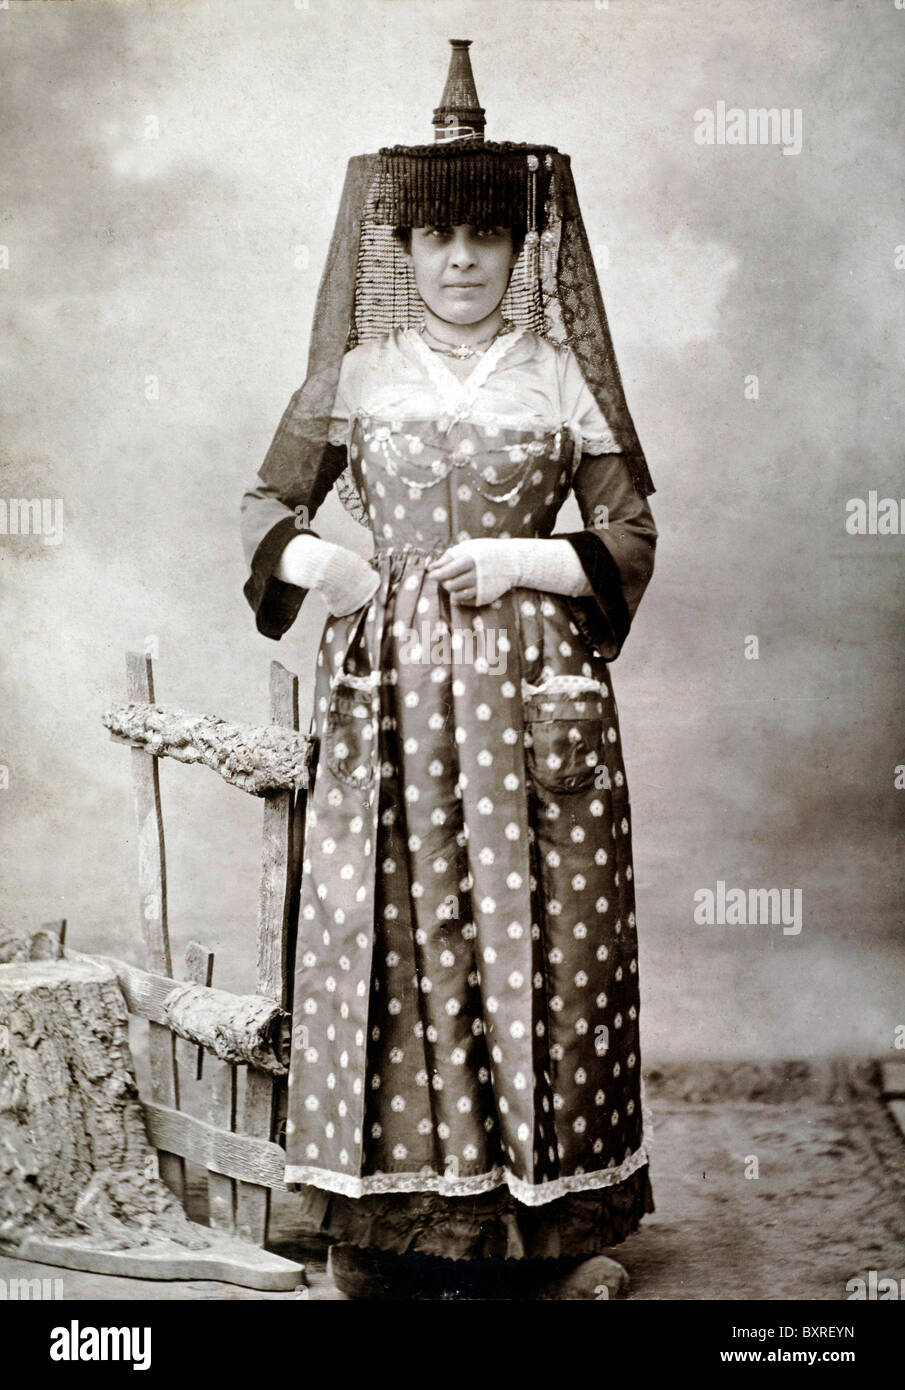 Full-length Portrait of French Woman in Traditional Folklore or Folkloric Costume, or Folk Costume from Mâcon, Burgundy, Central France (c1900) Stock Photo